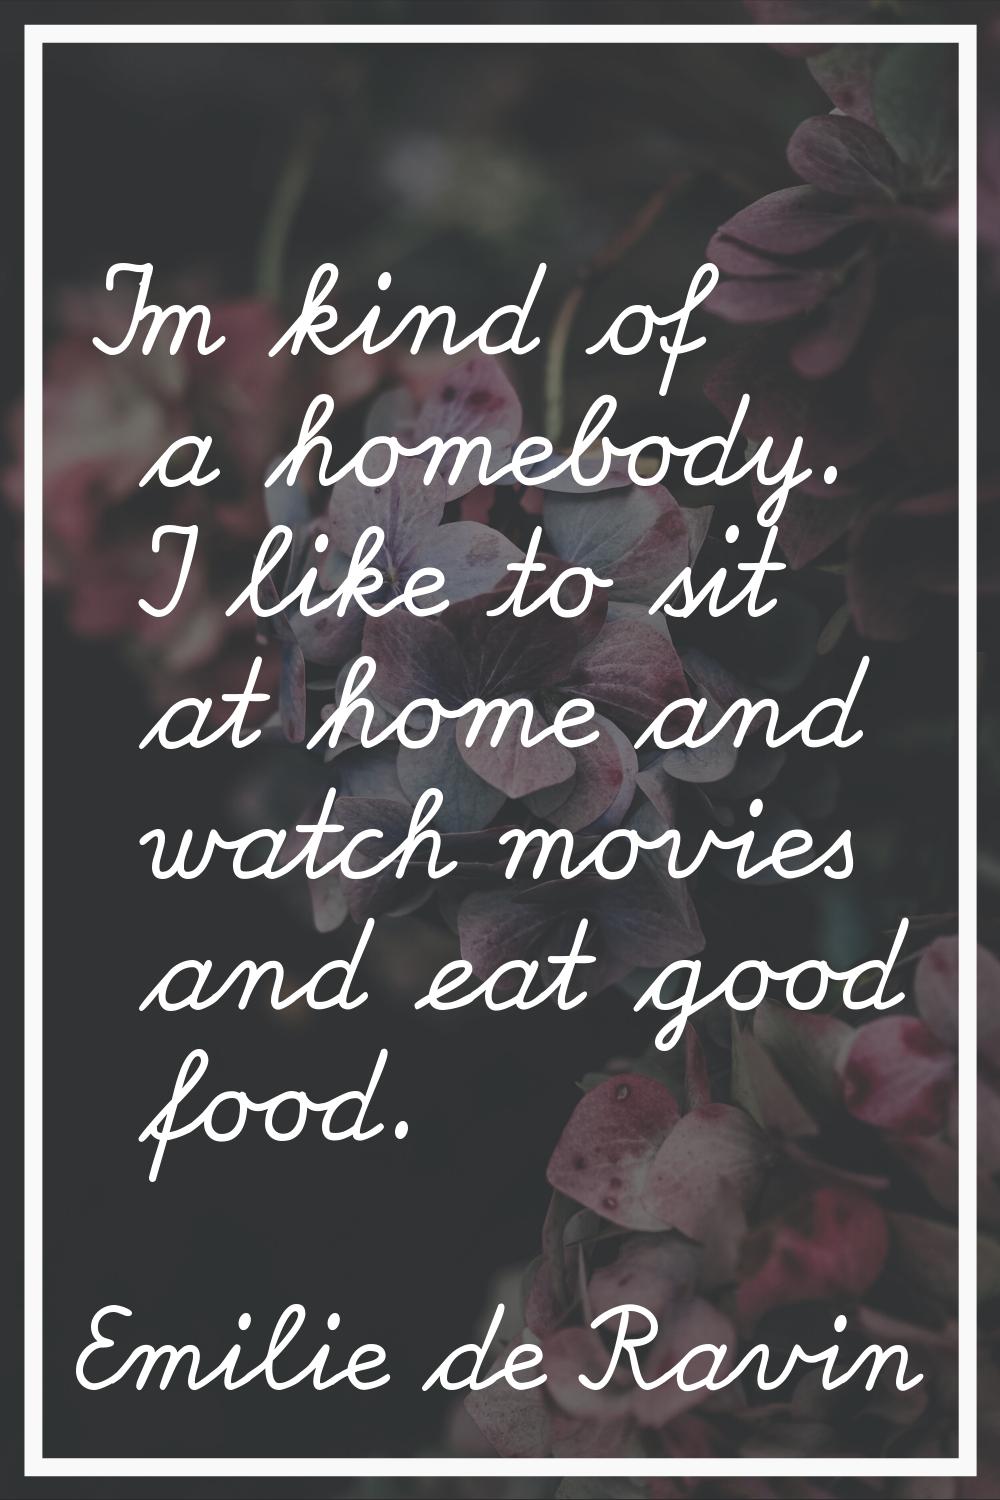 I'm kind of a homebody. I like to sit at home and watch movies and eat good food.